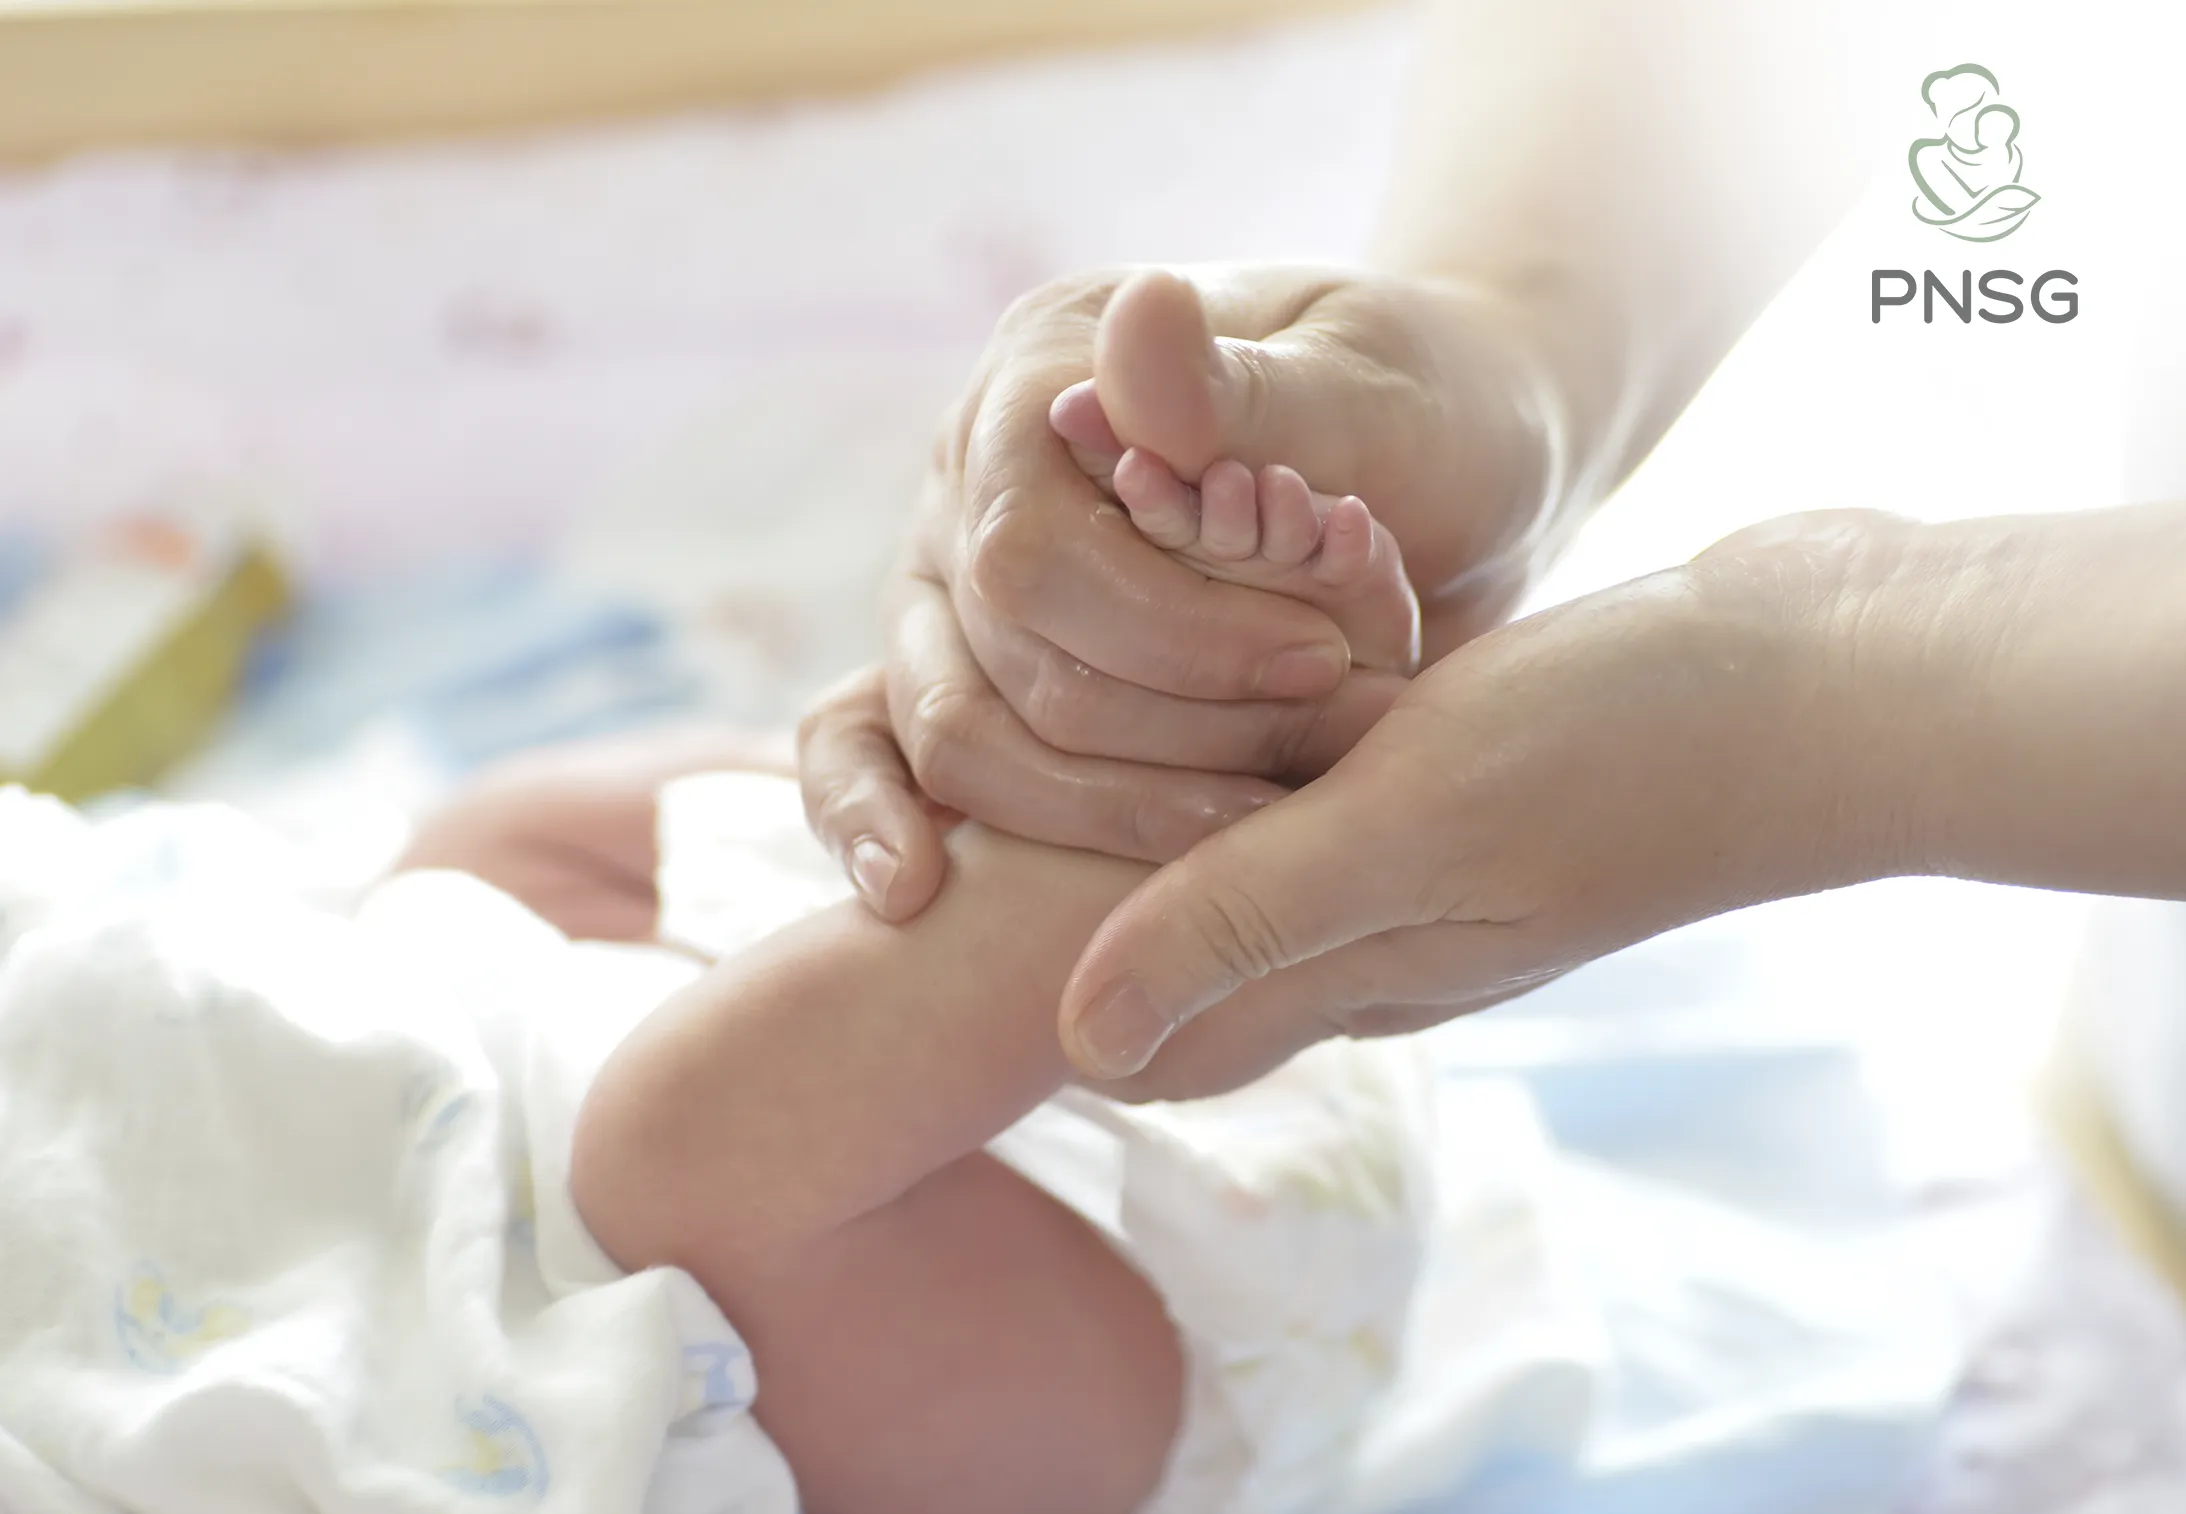 Newborn Massage: What to Know & How to Do It Safely